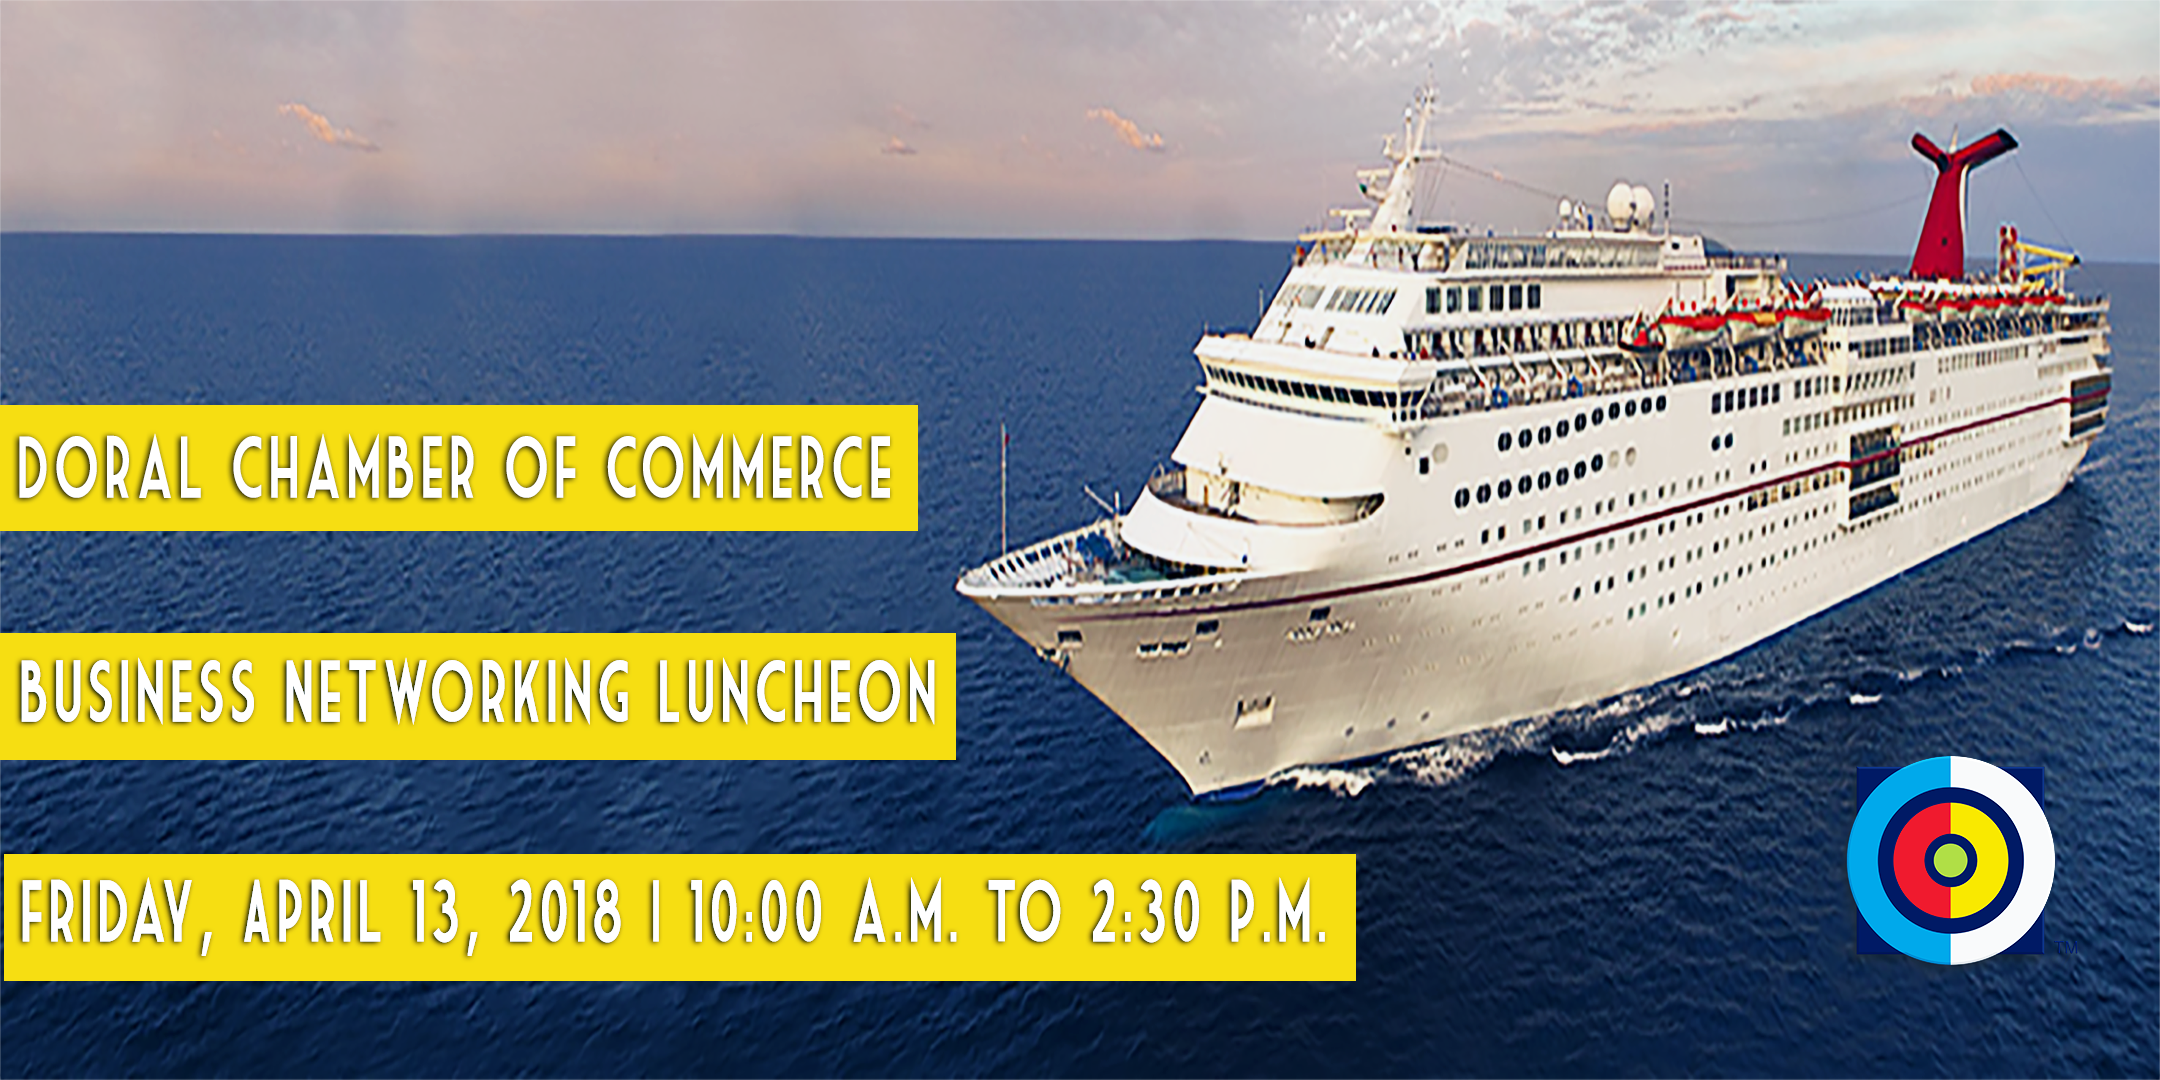 Carnival Cruise Line Doral Chamber Luncheon at Port Miami